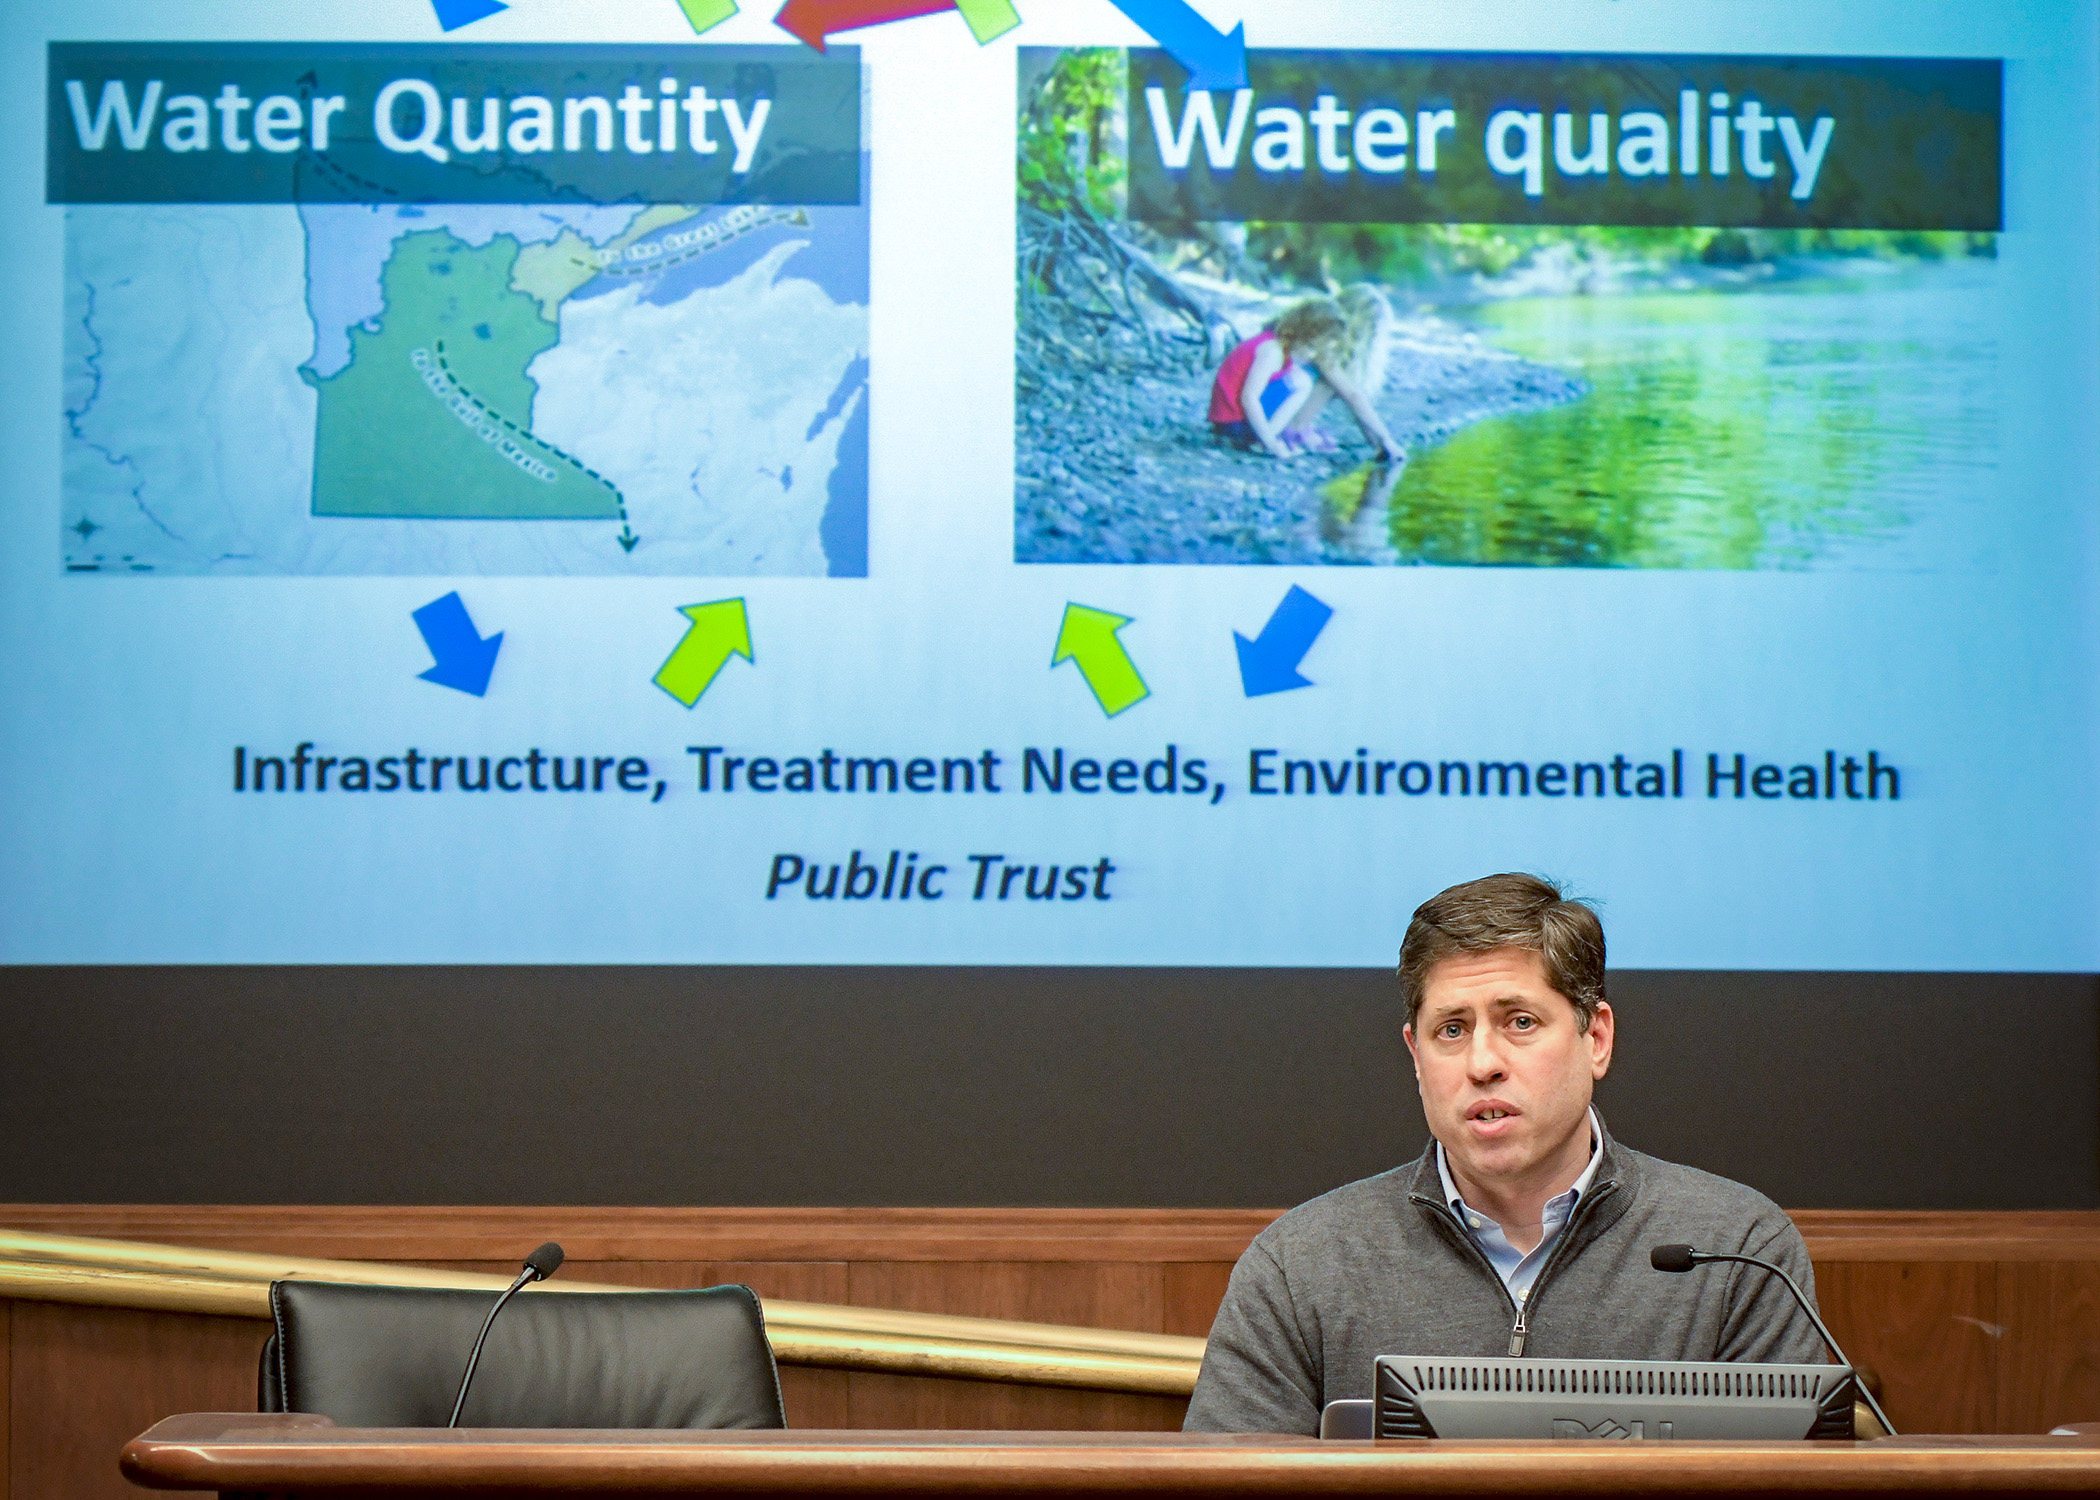 University of Minnesota professor Bill Arnold makes a Jan. 28 presentation to the House Water Division on water issues facing the state. Photo by Andrew VonBank